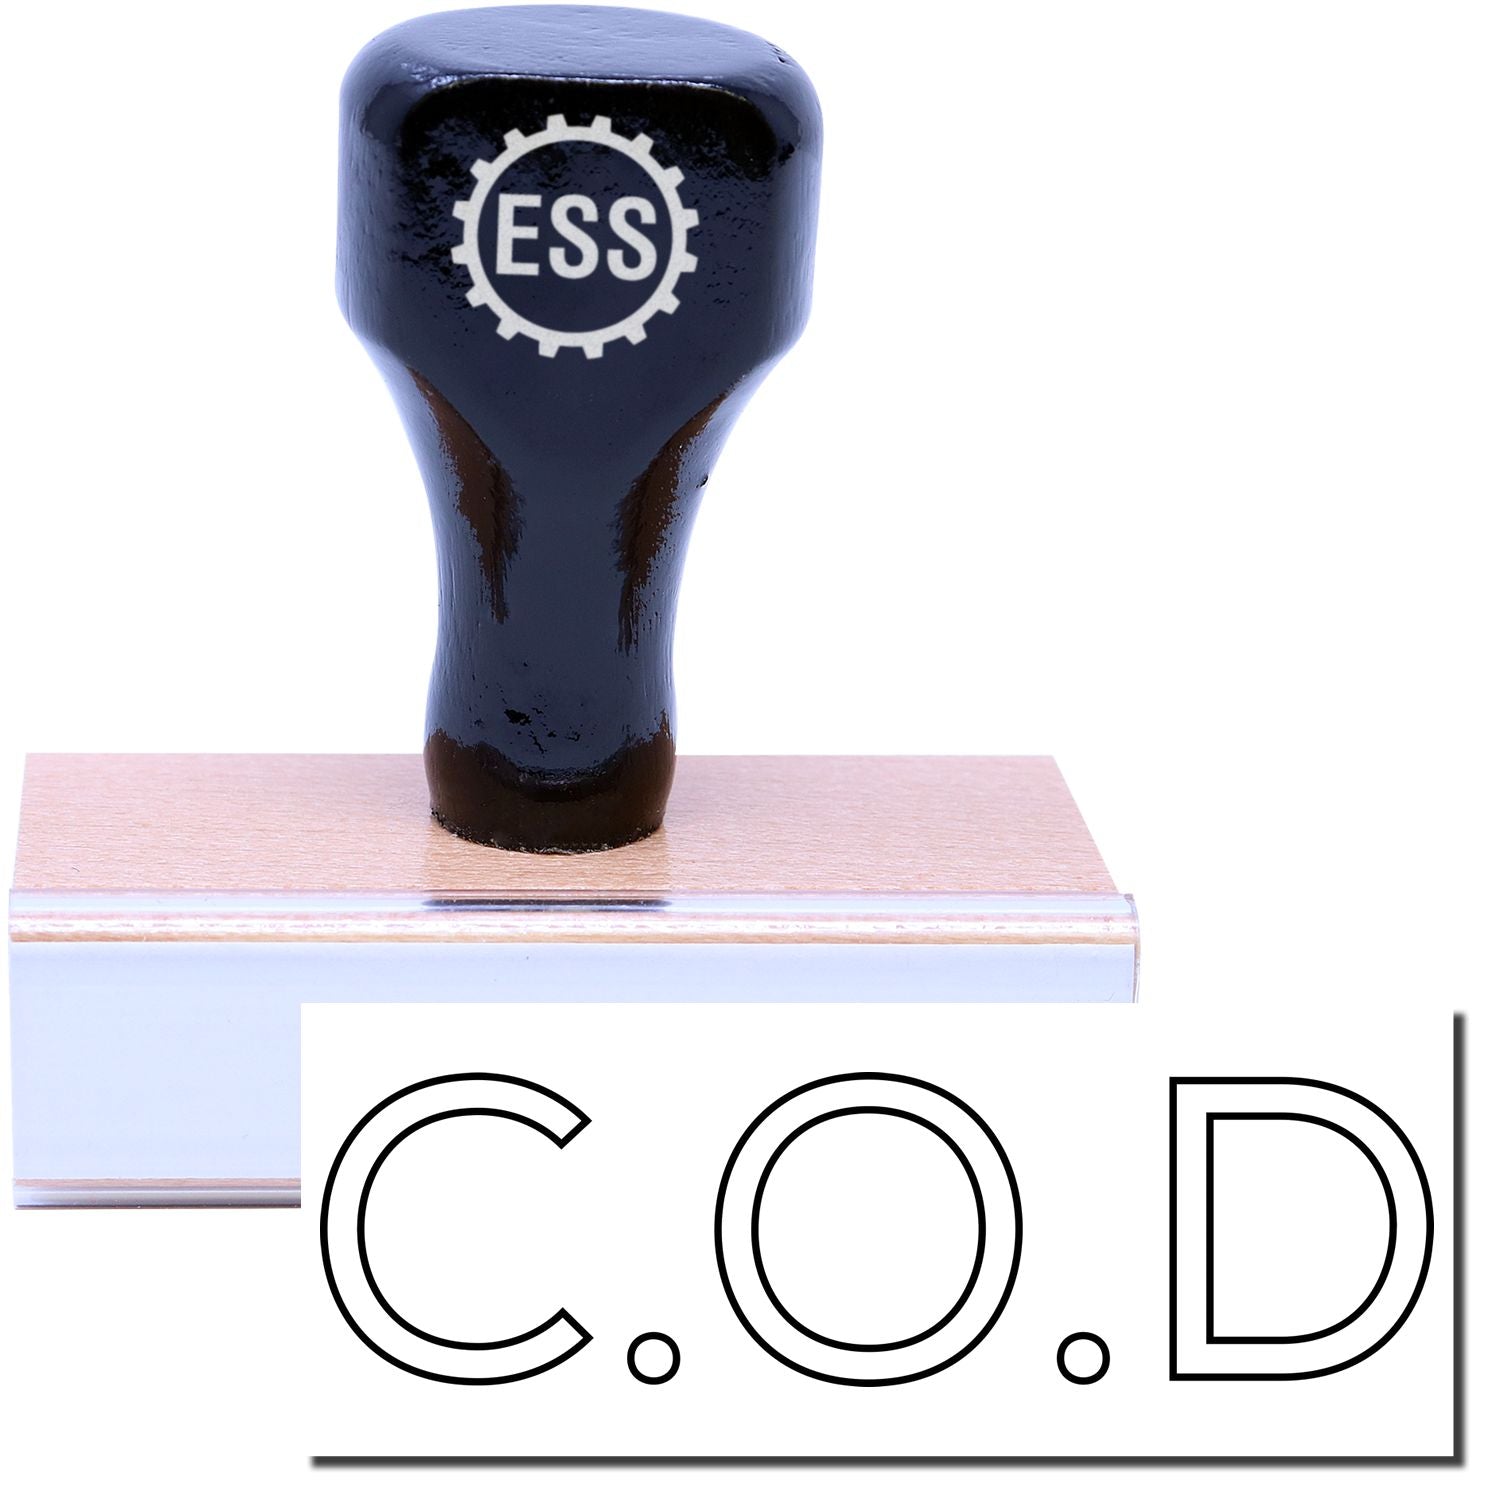 A stock office rubber stamp with a stamped image showing how the text "C.O.D" in an outline font is displayed after stamping.